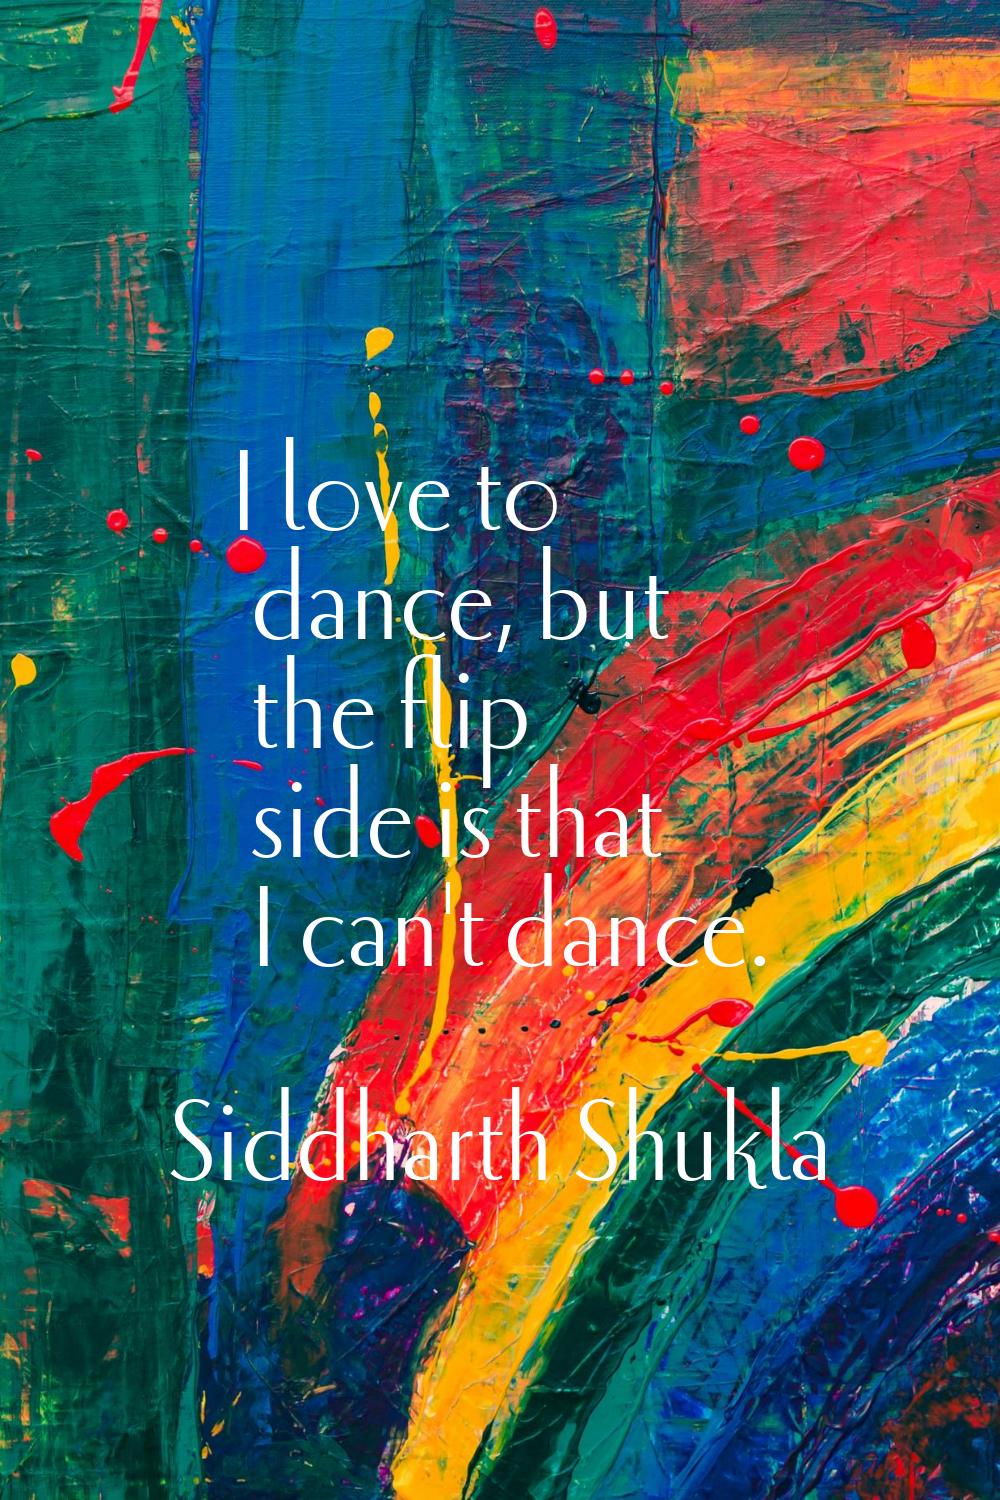 I love to dance, but the flip side is that I can't dance.